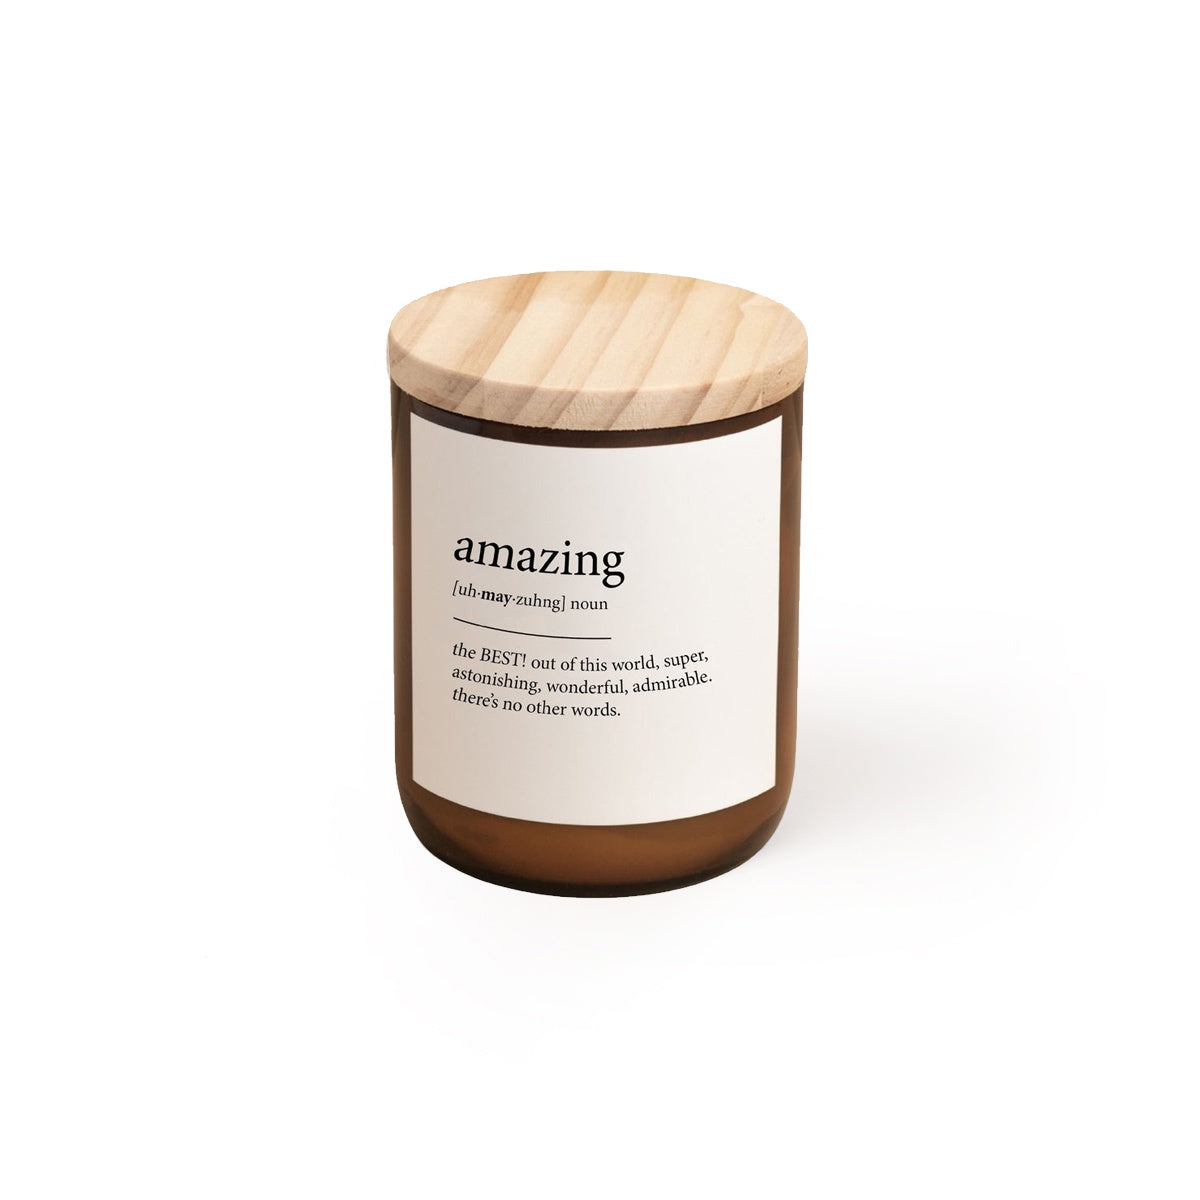 Dictionary Meaning Candle - Amazing